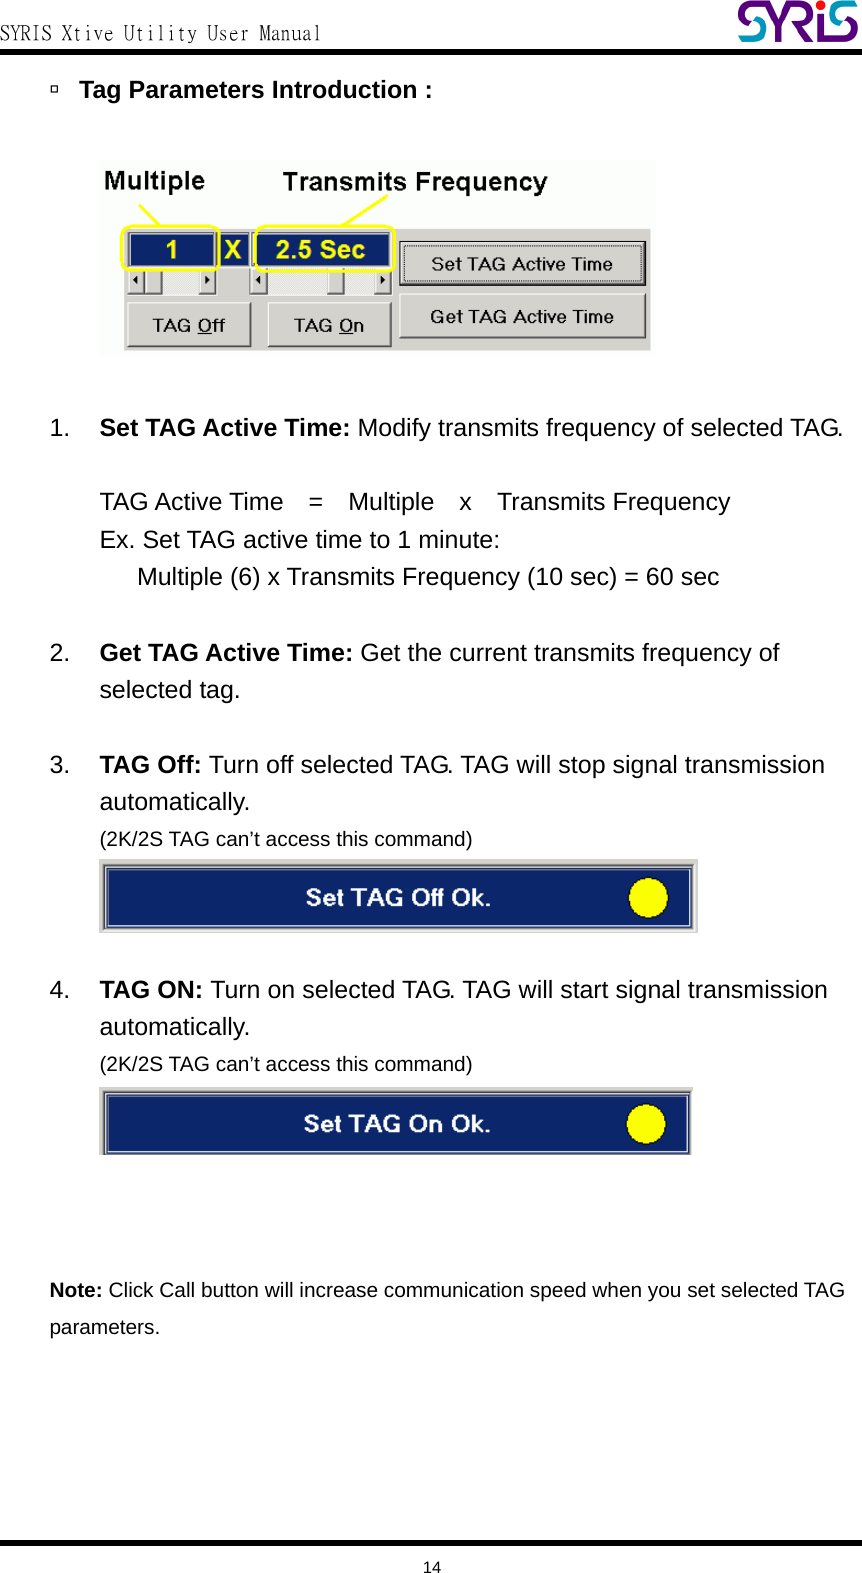  SYRIS Xtive Utility User Manual  à Tag Parameters Introduction :      1.  Set TAG Active Time: Modify transmits frequency of selected TAG.  TAG Active Time  =  Multiple  x  Transmits Frequency Ex. Set TAG active time to 1 minute:         Multiple (6) x Transmits Frequency (10 sec) = 60 sec  2.  Get TAG Active Time: Get the current transmits frequency of selected tag.  3.  TAG Off: Turn off selected TAG. TAG will stop signal transmission automatically. (2K/2S TAG can’t access this command)   4.  TAG ON: Turn on selected TAG. TAG will start signal transmission automatically. (2K/2S TAG can’t access this command)     Note: Click Call button will increase communication speed when you set selected TAG parameters.       14 